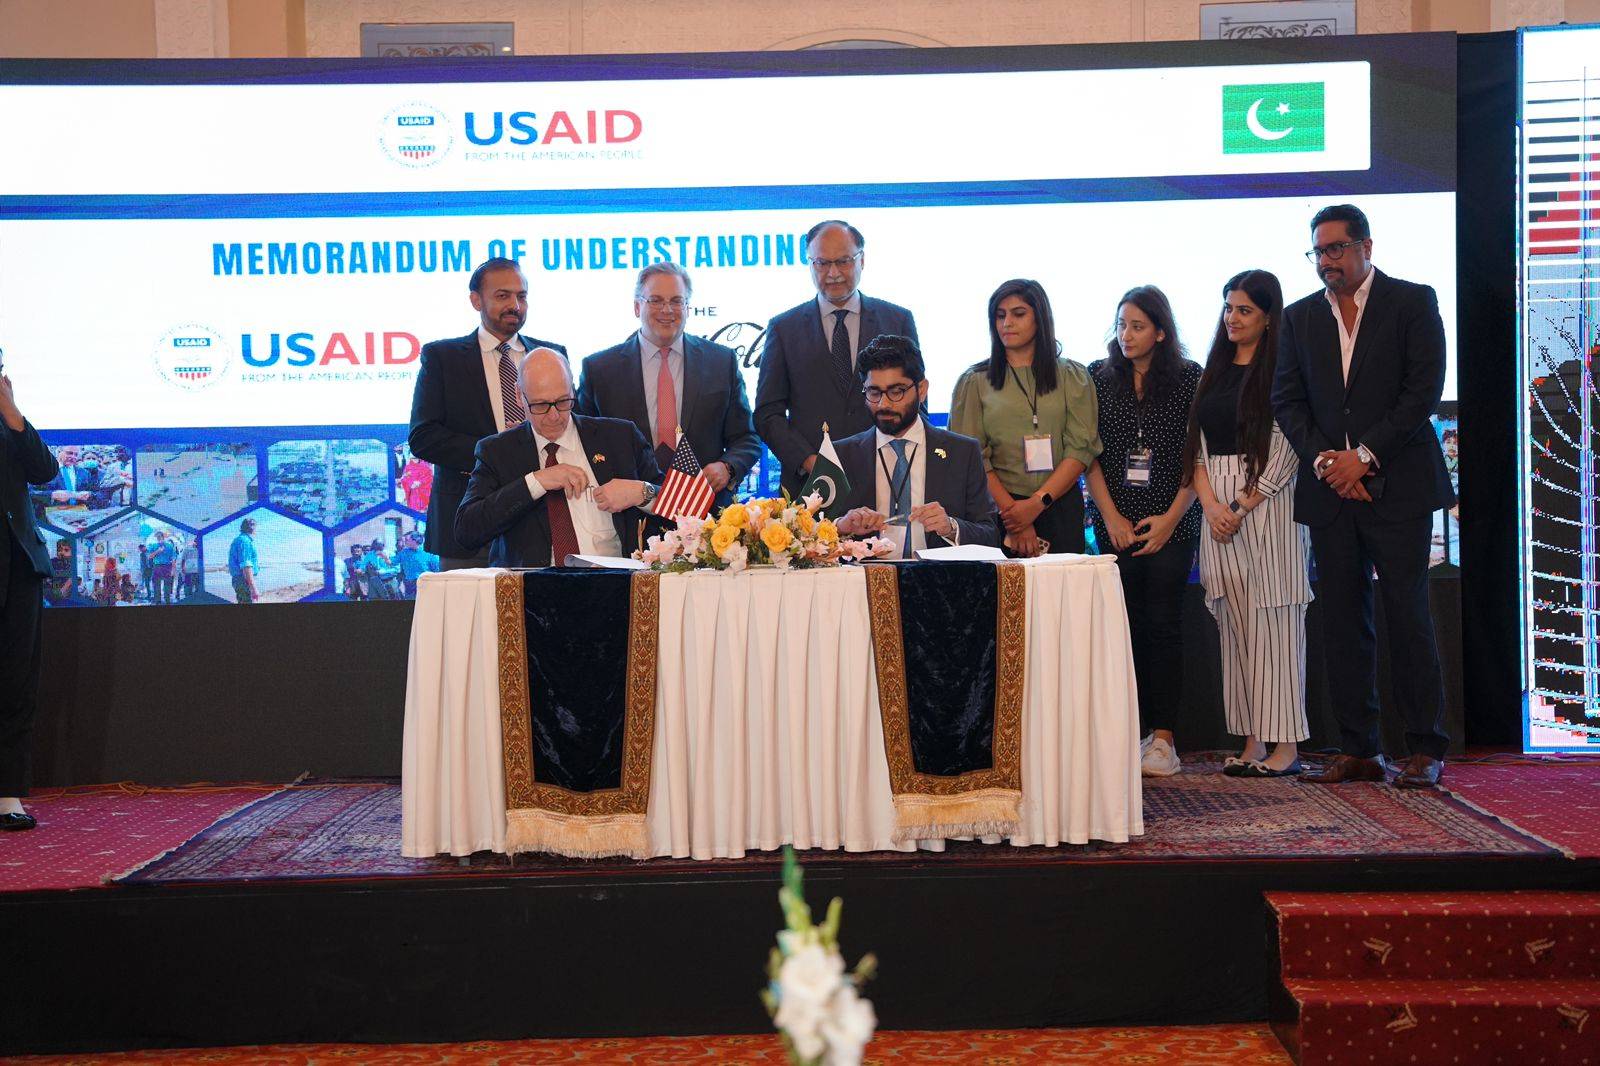 USAID and The Coca-Cola Organization Sign MOU to Help Flood-Impacted People group in Pakistan